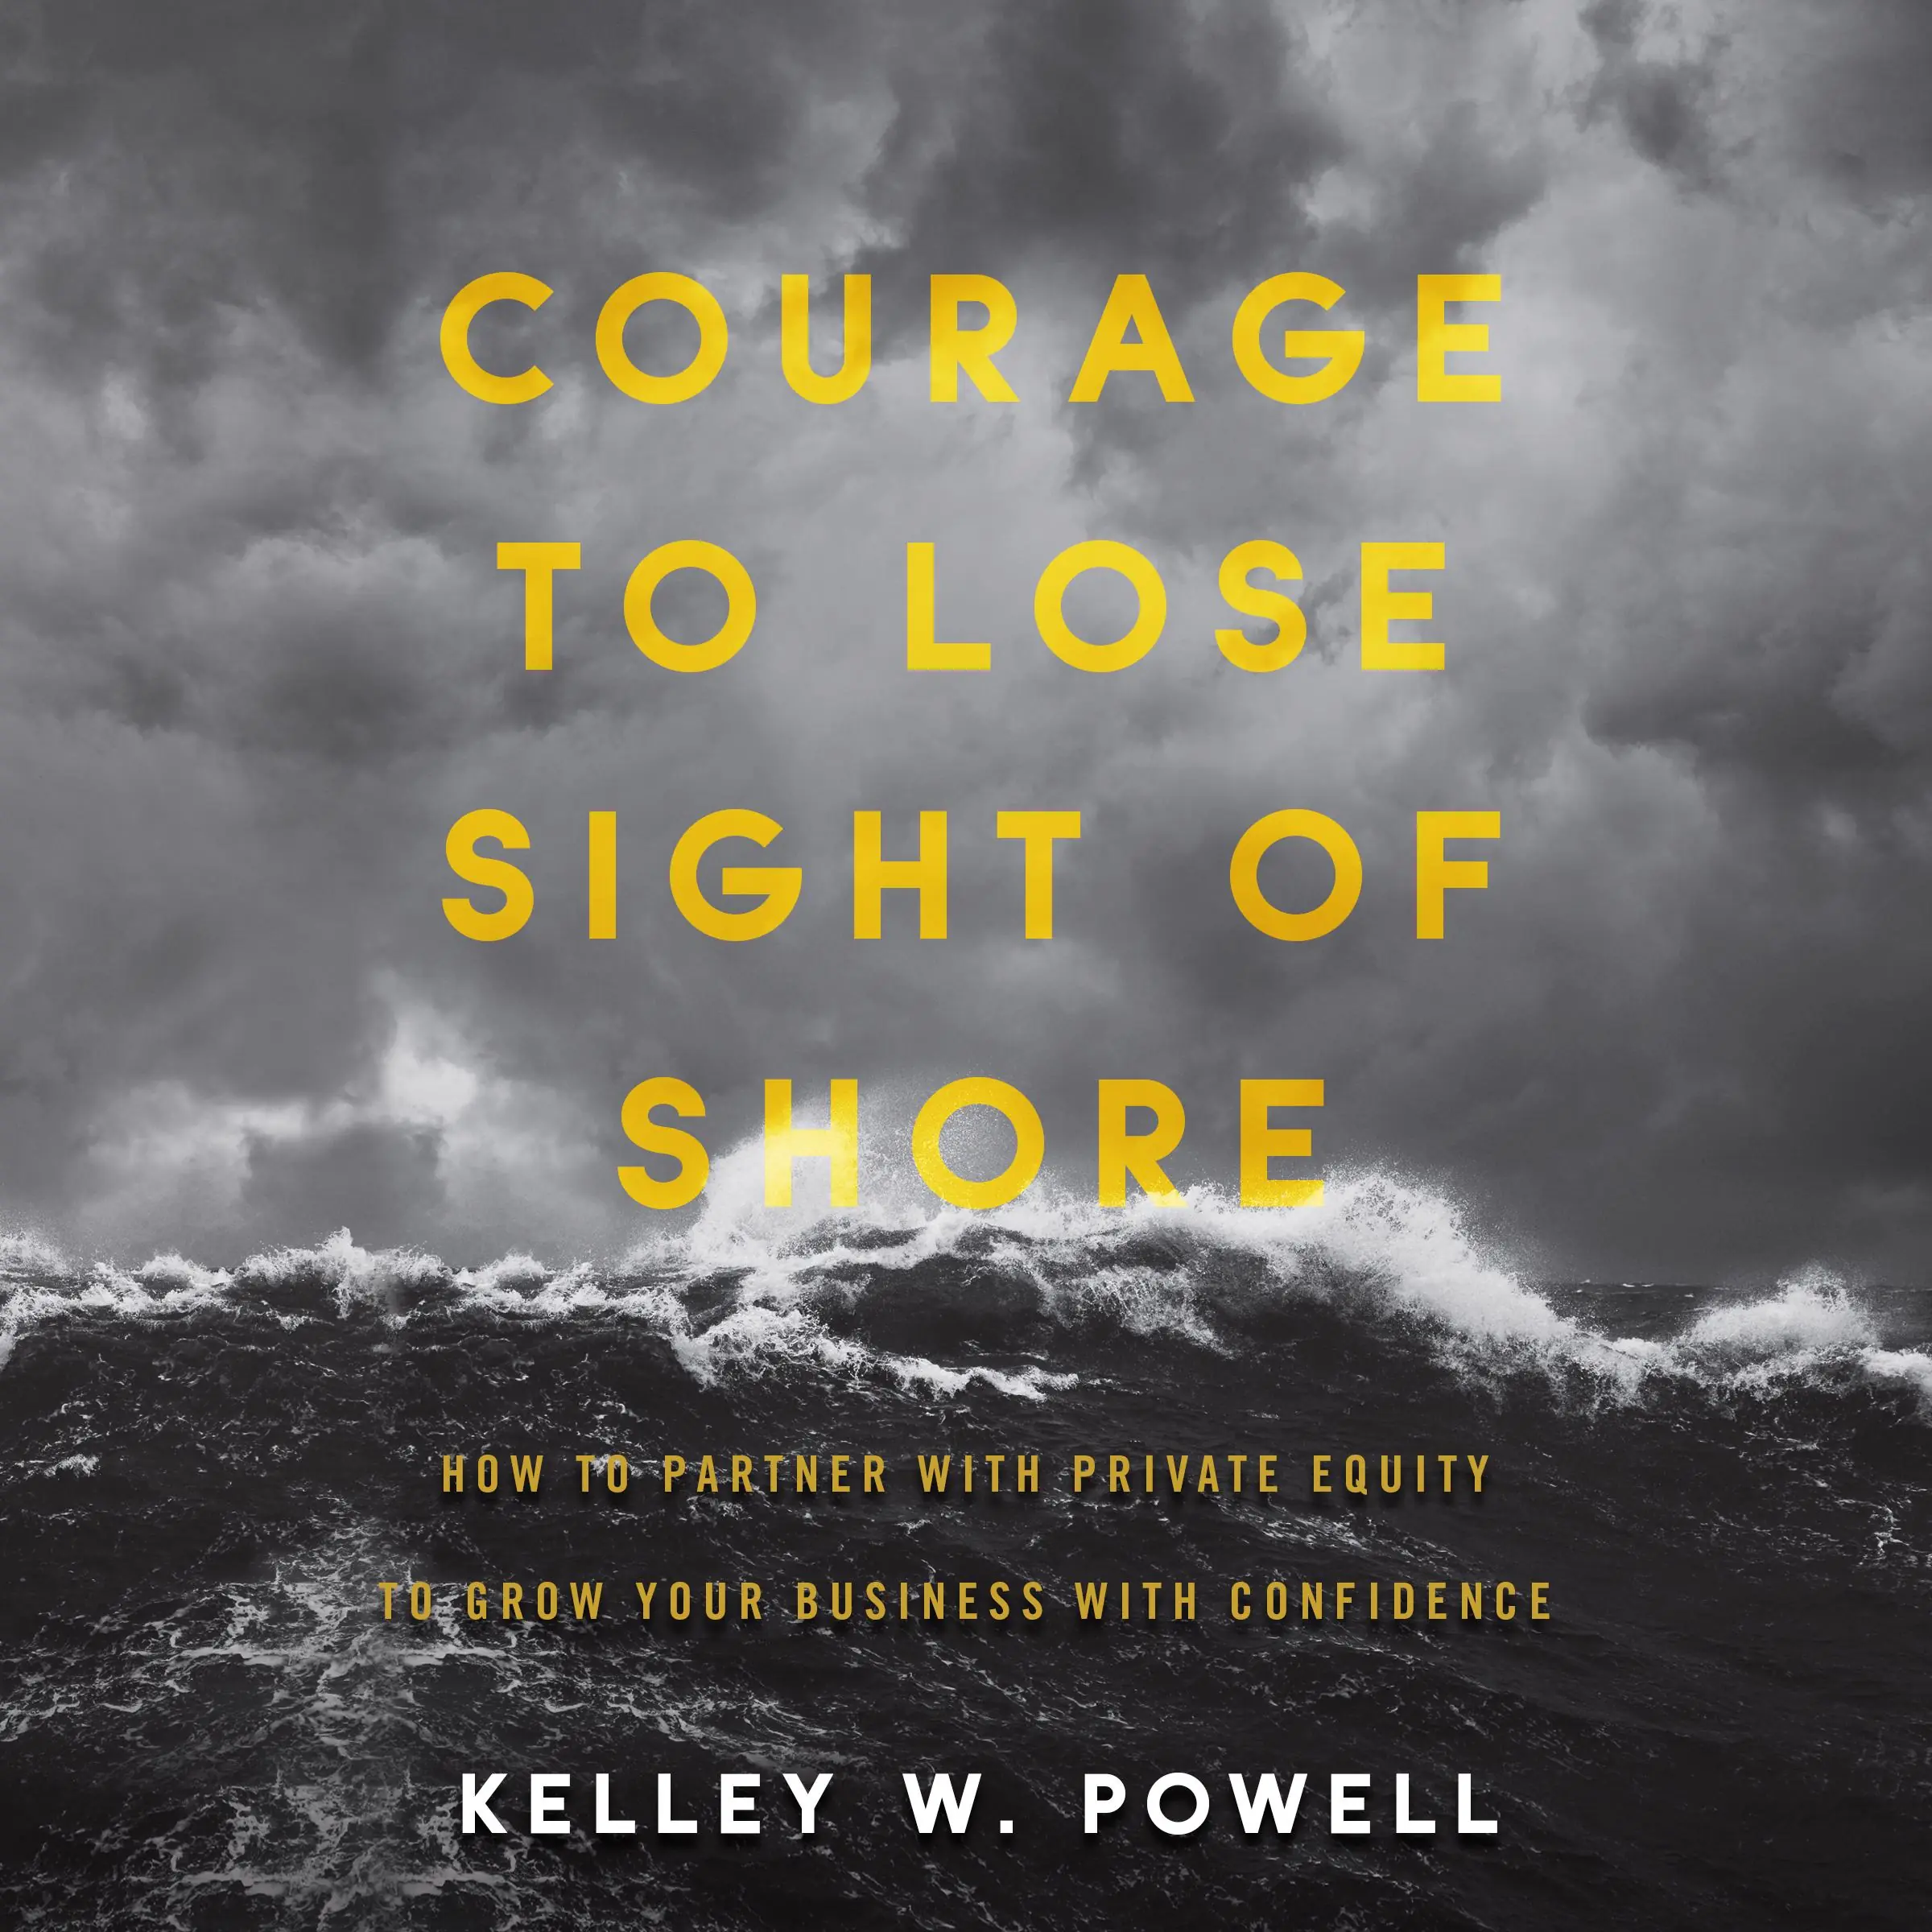 Courage to Lose Sight of Shore by Kelley W. Powell Audiobook